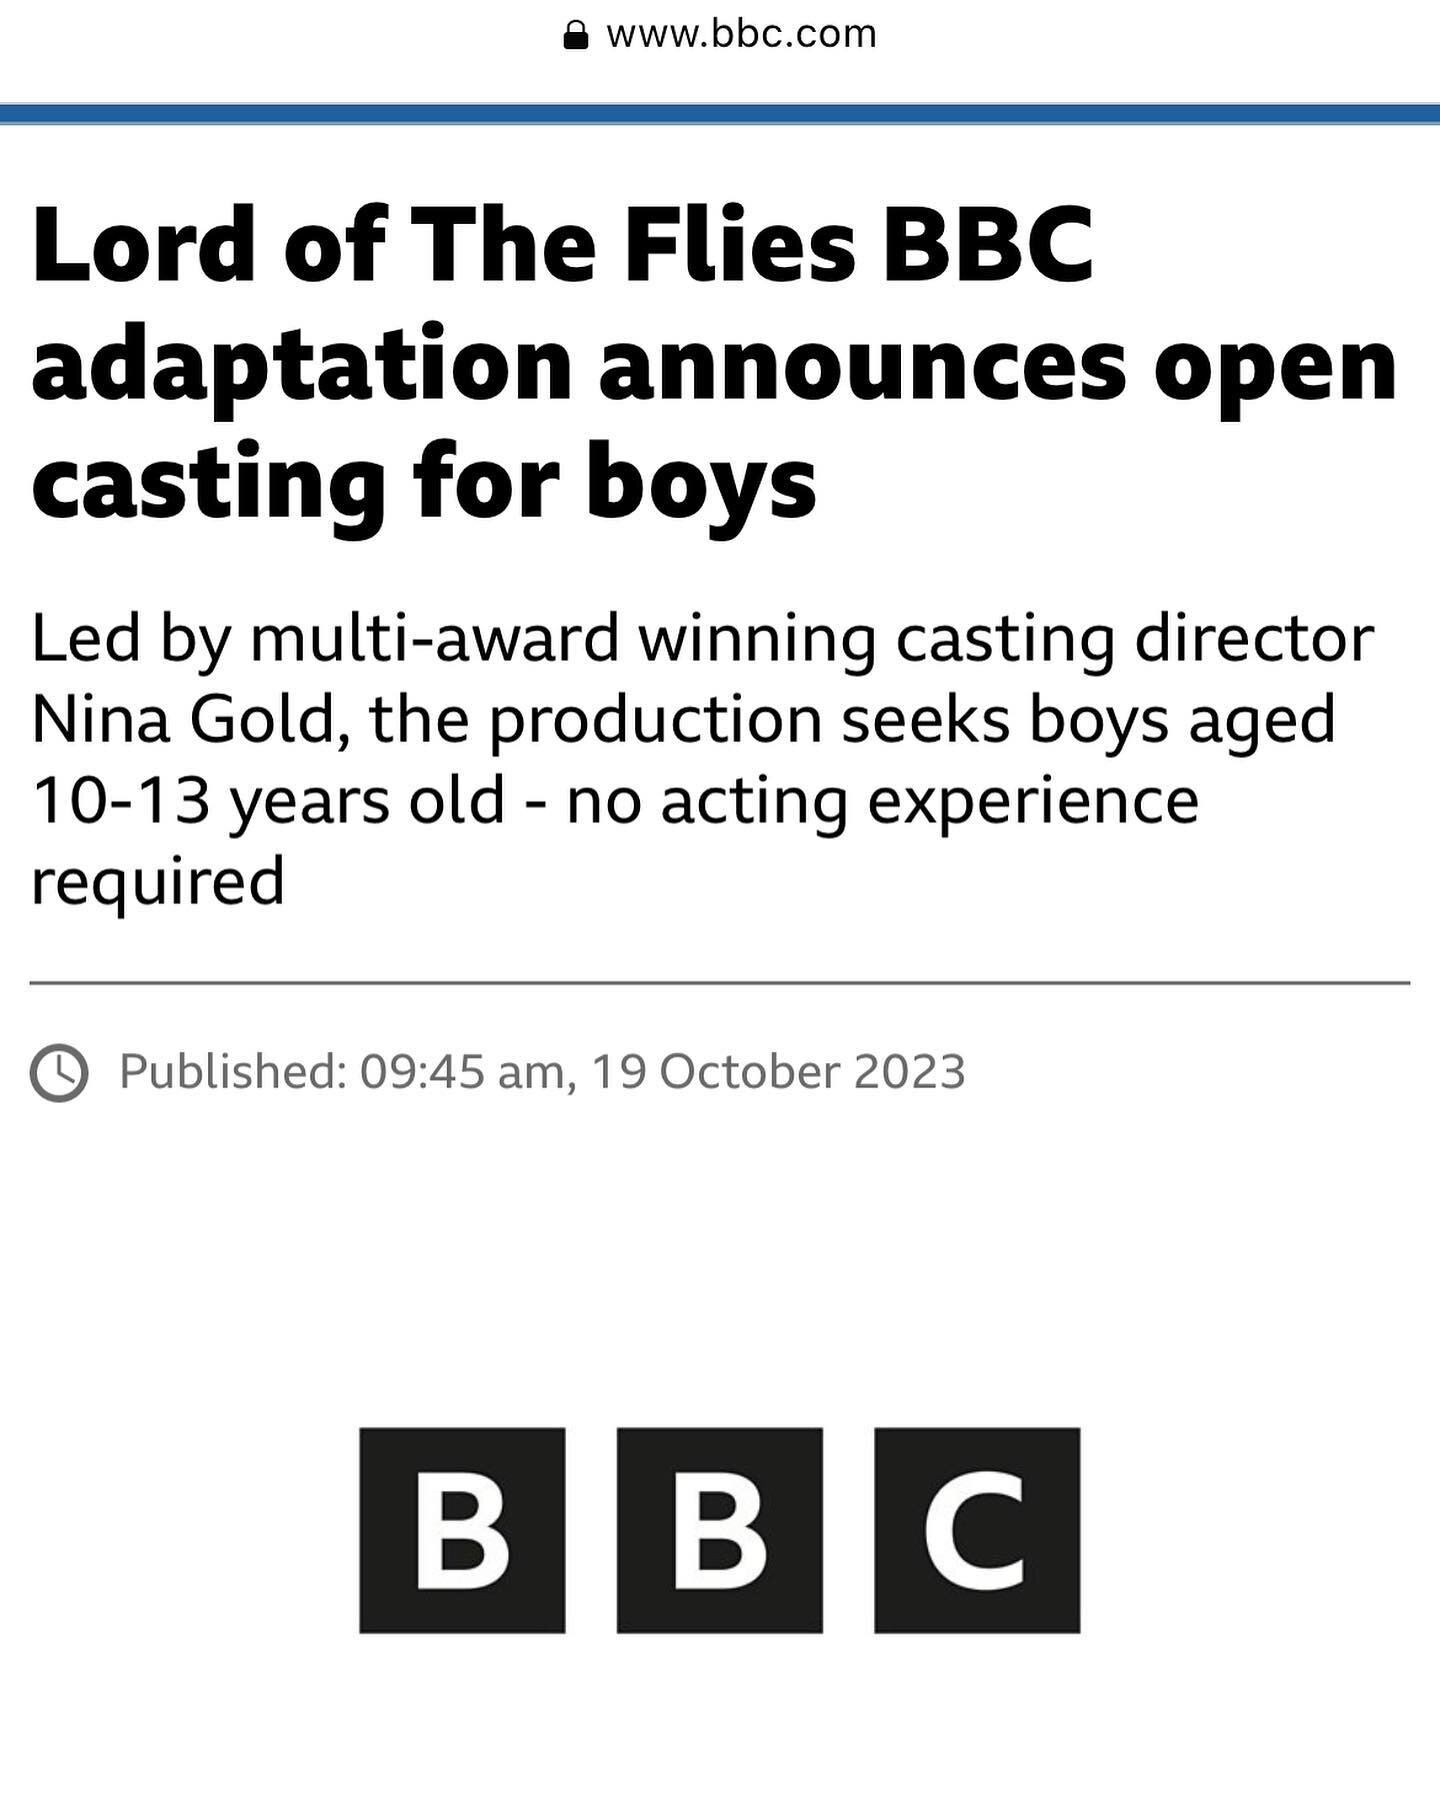 Check out this open Casting opportunity for boys aged 10-13 by the BBC. Email me to clarestartalent@gmail.com for more information or help with your self-tape! #casting #castingforkids #bbc